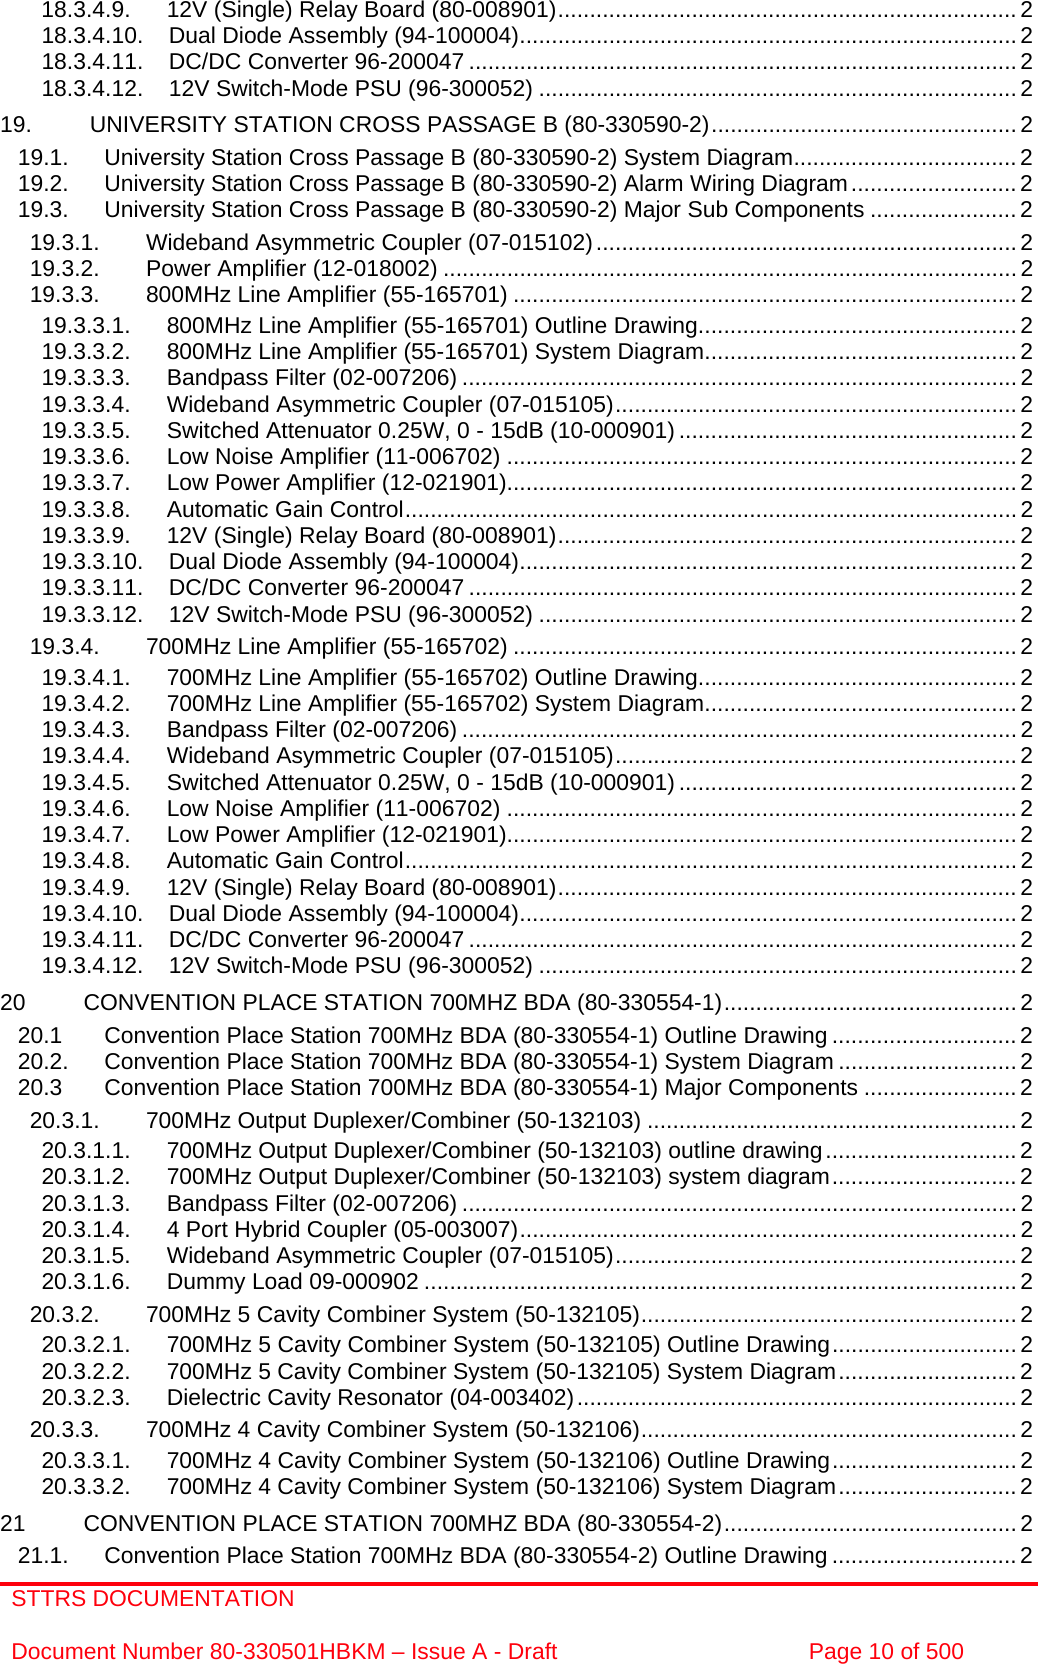 STTRS DOCUMENTATION  Document Number 80-330501HBKM – Issue A - Draft  Page 10 of 500  18.3.4.9. 12V (Single) Relay Board (80-008901)........................................................................ 2 18.3.4.10. Dual Diode Assembly (94-100004).............................................................................. 2 18.3.4.11. DC/DC Converter 96-200047 ...................................................................................... 2 18.3.4.12. 12V Switch-Mode PSU (96-300052) ........................................................................... 2 19.  UNIVERSITY STATION CROSS PASSAGE B (80-330590-2)................................................2 19.1. University Station Cross Passage B (80-330590-2) System Diagram................................... 2 19.2. University Station Cross Passage B (80-330590-2) Alarm Wiring Diagram.......................... 2 19.3. University Station Cross Passage B (80-330590-2) Major Sub Components ....................... 2 19.3.1. Wideband Asymmetric Coupler (07-015102).................................................................. 2 19.3.2. Power Amplifier (12-018002) .......................................................................................... 2 19.3.3. 800MHz Line Amplifier (55-165701) ............................................................................... 2 19.3.3.1. 800MHz Line Amplifier (55-165701) Outline Drawing.................................................. 2 19.3.3.2. 800MHz Line Amplifier (55-165701) System Diagram................................................. 2 19.3.3.3. Bandpass Filter (02-007206) ....................................................................................... 2 19.3.3.4. Wideband Asymmetric Coupler (07-015105)............................................................... 2 19.3.3.5. Switched Attenuator 0.25W, 0 - 15dB (10-000901) ..................................................... 2 19.3.3.6. Low Noise Amplifier (11-006702) ................................................................................2 19.3.3.7. Low Power Amplifier (12-021901)................................................................................2 19.3.3.8. Automatic Gain Control................................................................................................ 2 19.3.3.9. 12V (Single) Relay Board (80-008901)........................................................................ 2 19.3.3.10. Dual Diode Assembly (94-100004).............................................................................. 2 19.3.3.11. DC/DC Converter 96-200047 ...................................................................................... 2 19.3.3.12. 12V Switch-Mode PSU (96-300052) ........................................................................... 2 19.3.4. 700MHz Line Amplifier (55-165702) ............................................................................... 2 19.3.4.1. 700MHz Line Amplifier (55-165702) Outline Drawing.................................................. 2 19.3.4.2. 700MHz Line Amplifier (55-165702) System Diagram................................................. 2 19.3.4.3. Bandpass Filter (02-007206) ....................................................................................... 2 19.3.4.4. Wideband Asymmetric Coupler (07-015105)............................................................... 2 19.3.4.5. Switched Attenuator 0.25W, 0 - 15dB (10-000901) ..................................................... 2 19.3.4.6. Low Noise Amplifier (11-006702) ................................................................................2 19.3.4.7. Low Power Amplifier (12-021901)................................................................................2 19.3.4.8. Automatic Gain Control................................................................................................ 2 19.3.4.9. 12V (Single) Relay Board (80-008901)........................................................................ 2 19.3.4.10. Dual Diode Assembly (94-100004).............................................................................. 2 19.3.4.11. DC/DC Converter 96-200047 ...................................................................................... 2 19.3.4.12. 12V Switch-Mode PSU (96-300052) ........................................................................... 2 20 CONVENTION PLACE STATION 700MHZ BDA (80-330554-1)..............................................2 20.1 Convention Place Station 700MHz BDA (80-330554-1) Outline Drawing .............................2 20.2. Convention Place Station 700MHz BDA (80-330554-1) System Diagram ............................ 2 20.3 Convention Place Station 700MHz BDA (80-330554-1) Major Components ........................2 20.3.1. 700MHz Output Duplexer/Combiner (50-132103) ..........................................................2 20.3.1.1. 700MHz Output Duplexer/Combiner (50-132103) outline drawing.............................. 2 20.3.1.2. 700MHz Output Duplexer/Combiner (50-132103) system diagram.............................2 20.3.1.3. Bandpass Filter (02-007206) ....................................................................................... 2 20.3.1.4. 4 Port Hybrid Coupler (05-003007).............................................................................. 2 20.3.1.5. Wideband Asymmetric Coupler (07-015105)............................................................... 2 20.3.1.6. Dummy Load 09-000902 .............................................................................................2 20.3.2. 700MHz 5 Cavity Combiner System (50-132105)...........................................................2 20.3.2.1. 700MHz 5 Cavity Combiner System (50-132105) Outline Drawing............................. 2 20.3.2.2. 700MHz 5 Cavity Combiner System (50-132105) System Diagram............................ 2 20.3.2.3. Dielectric Cavity Resonator (04-003402).....................................................................2 20.3.3. 700MHz 4 Cavity Combiner System (50-132106)...........................................................2 20.3.3.1. 700MHz 4 Cavity Combiner System (50-132106) Outline Drawing............................. 2 20.3.3.2. 700MHz 4 Cavity Combiner System (50-132106) System Diagram............................ 2 21 CONVENTION PLACE STATION 700MHZ BDA (80-330554-2)..............................................2 21.1. Convention Place Station 700MHz BDA (80-330554-2) Outline Drawing .............................2 